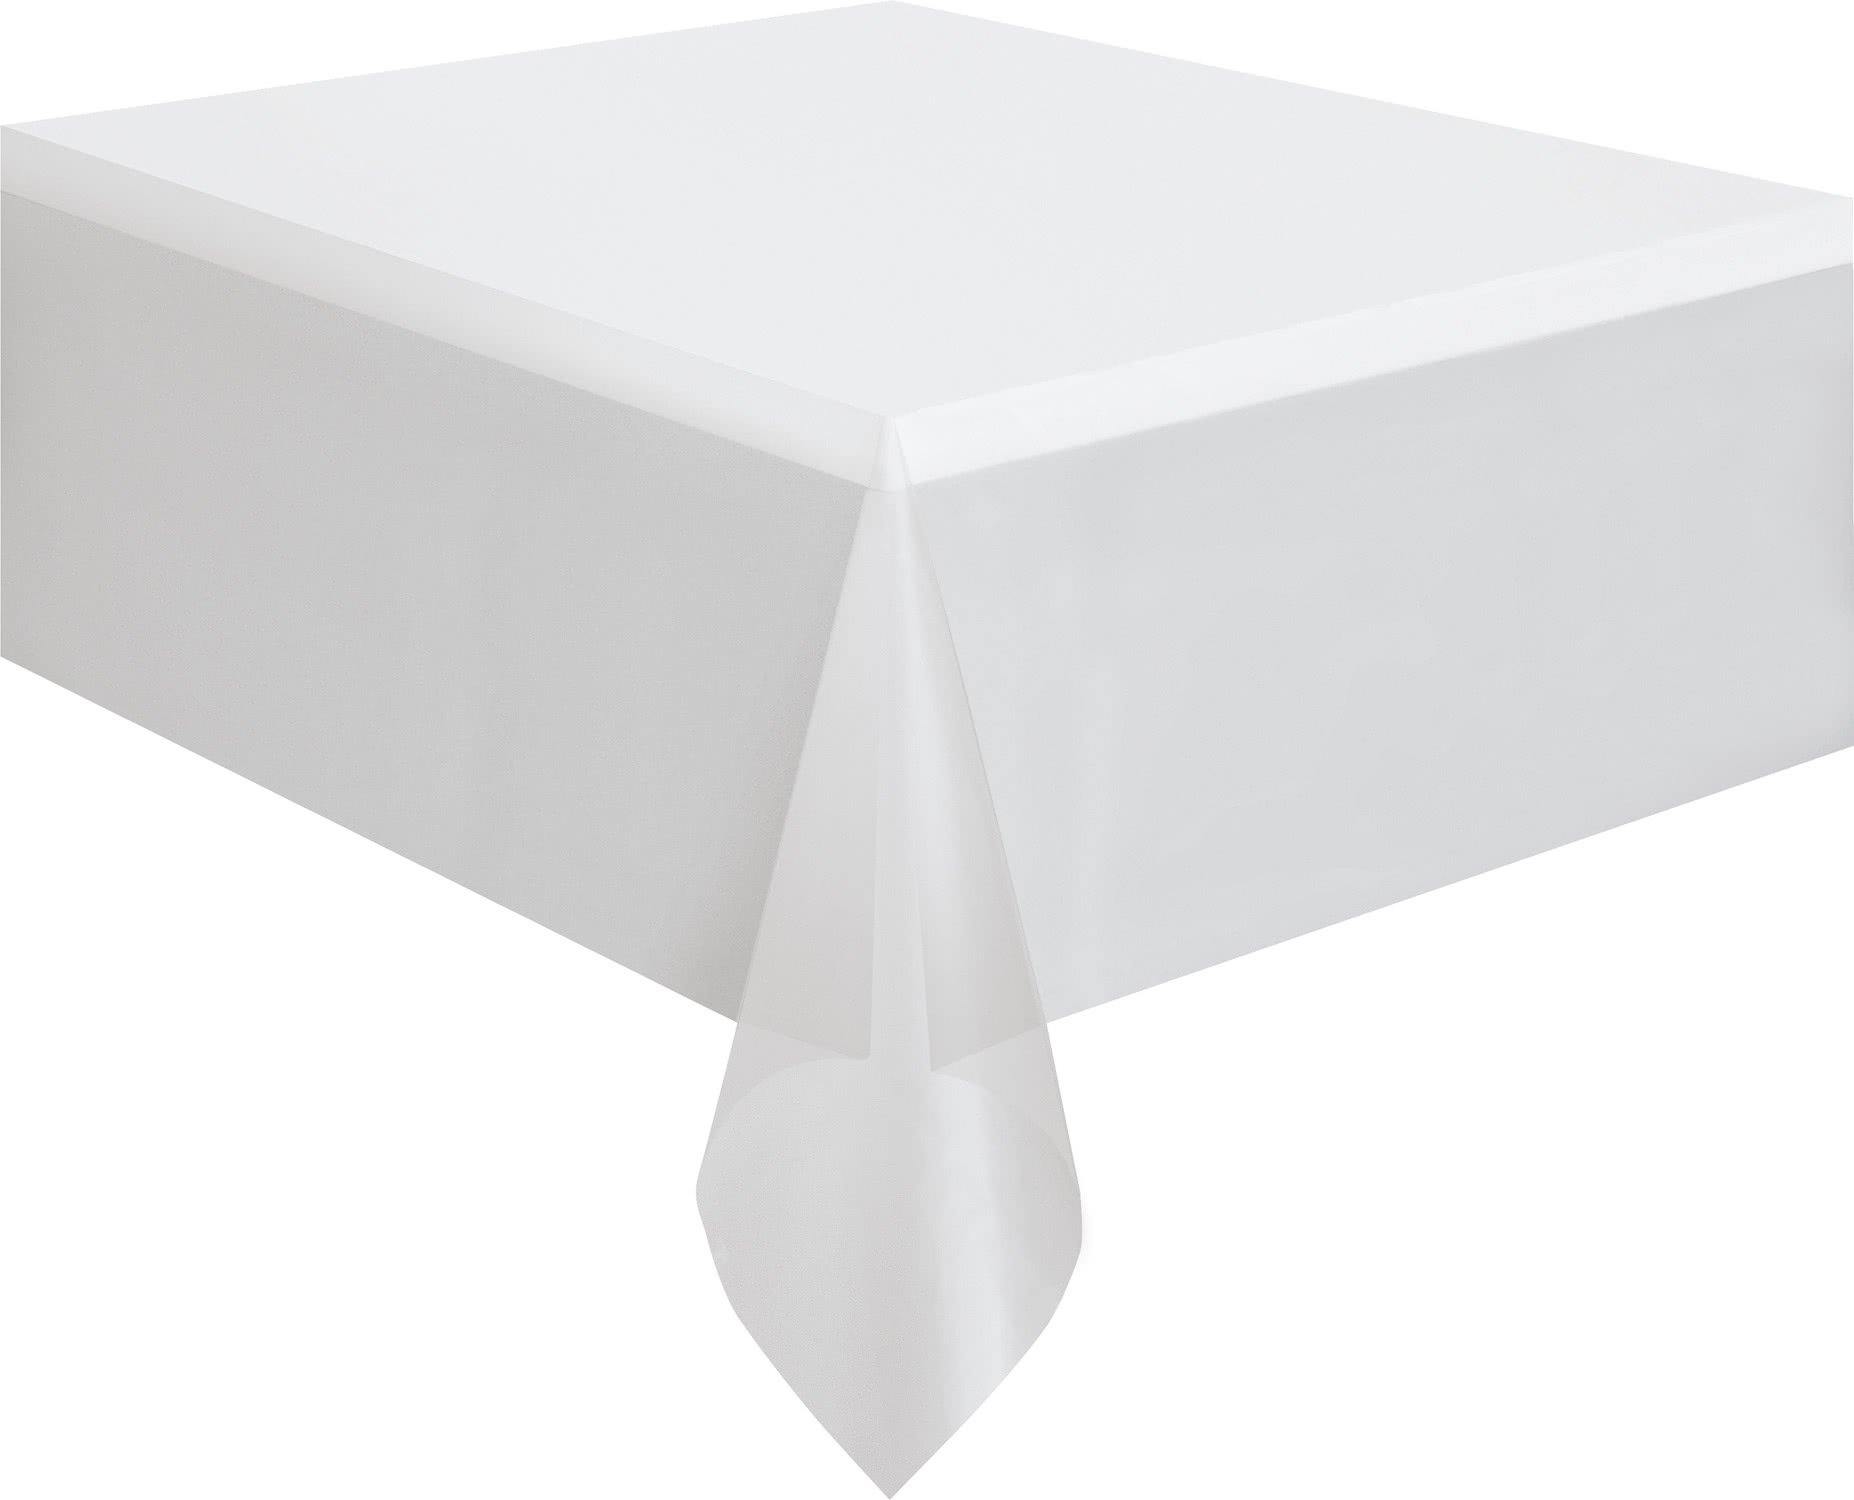 White Plastic Rectangle Party Tablecover - 137cm x 274cm - The Base Warehouse